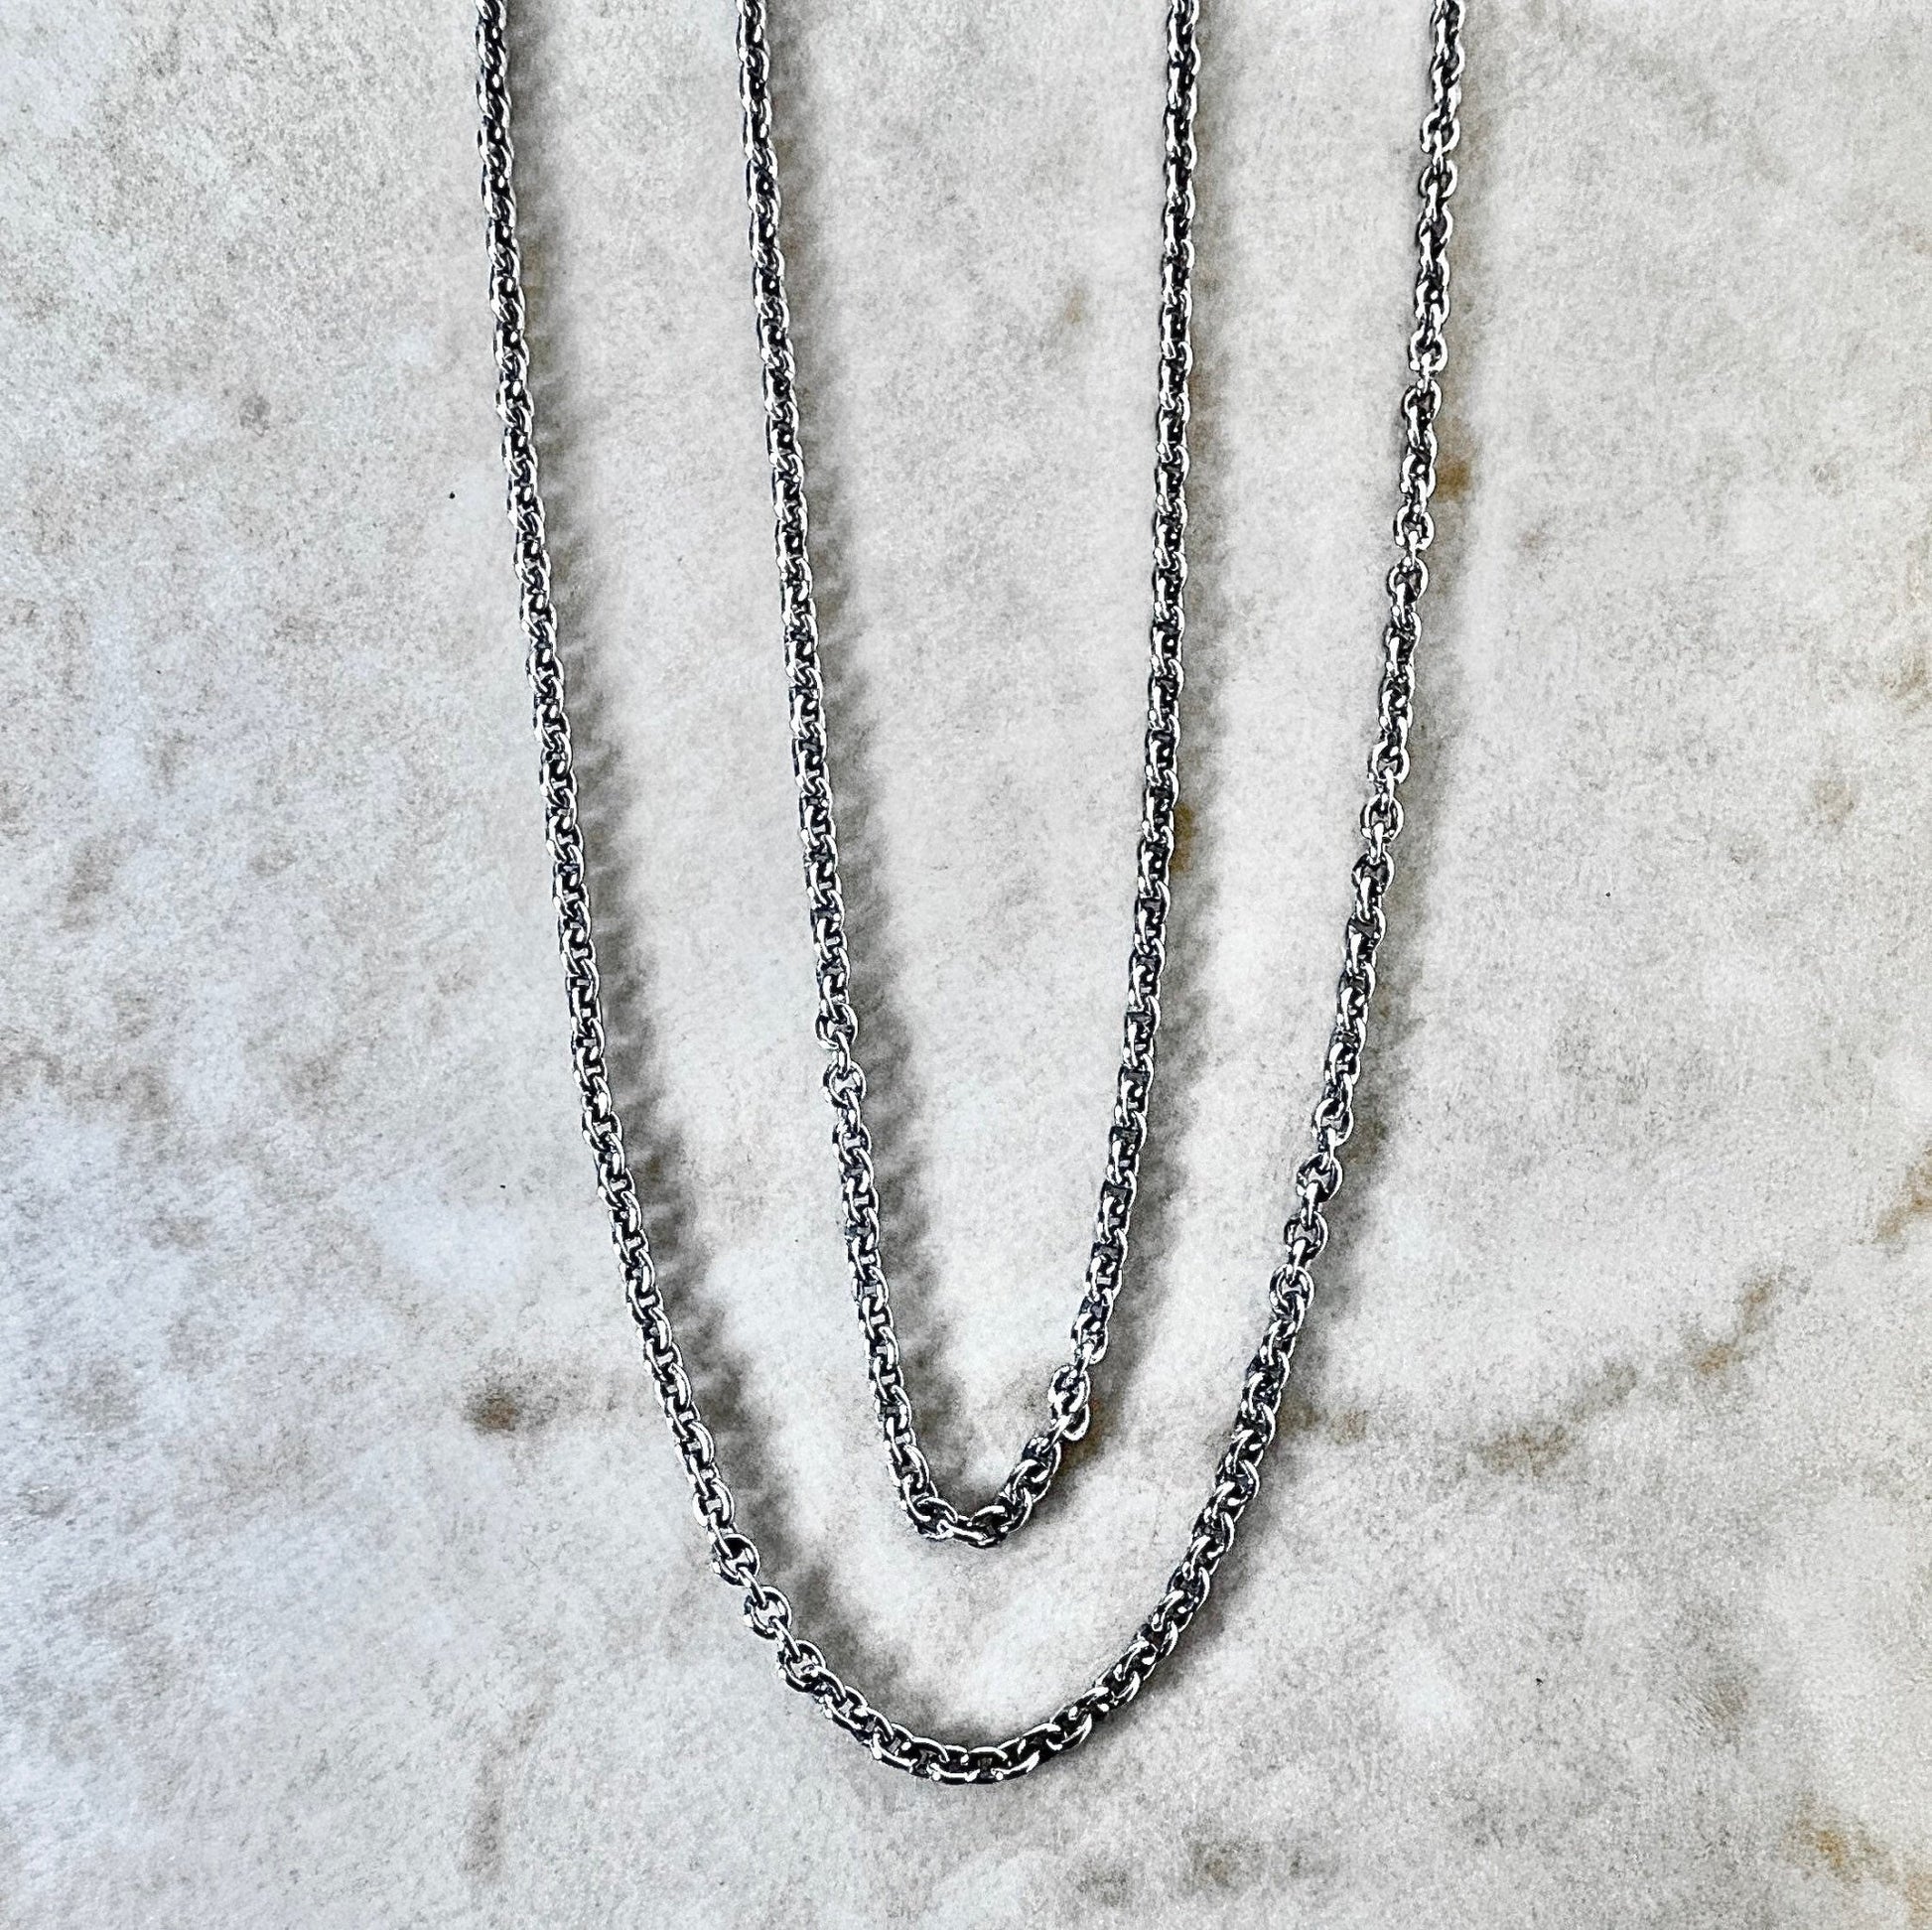 Vintage Italian 14K White Gold Cable Chain - 16-18” Adjustable Gold Chain - Gold Pendant Necklace - Birthday Gift For Her - Holiday Gift